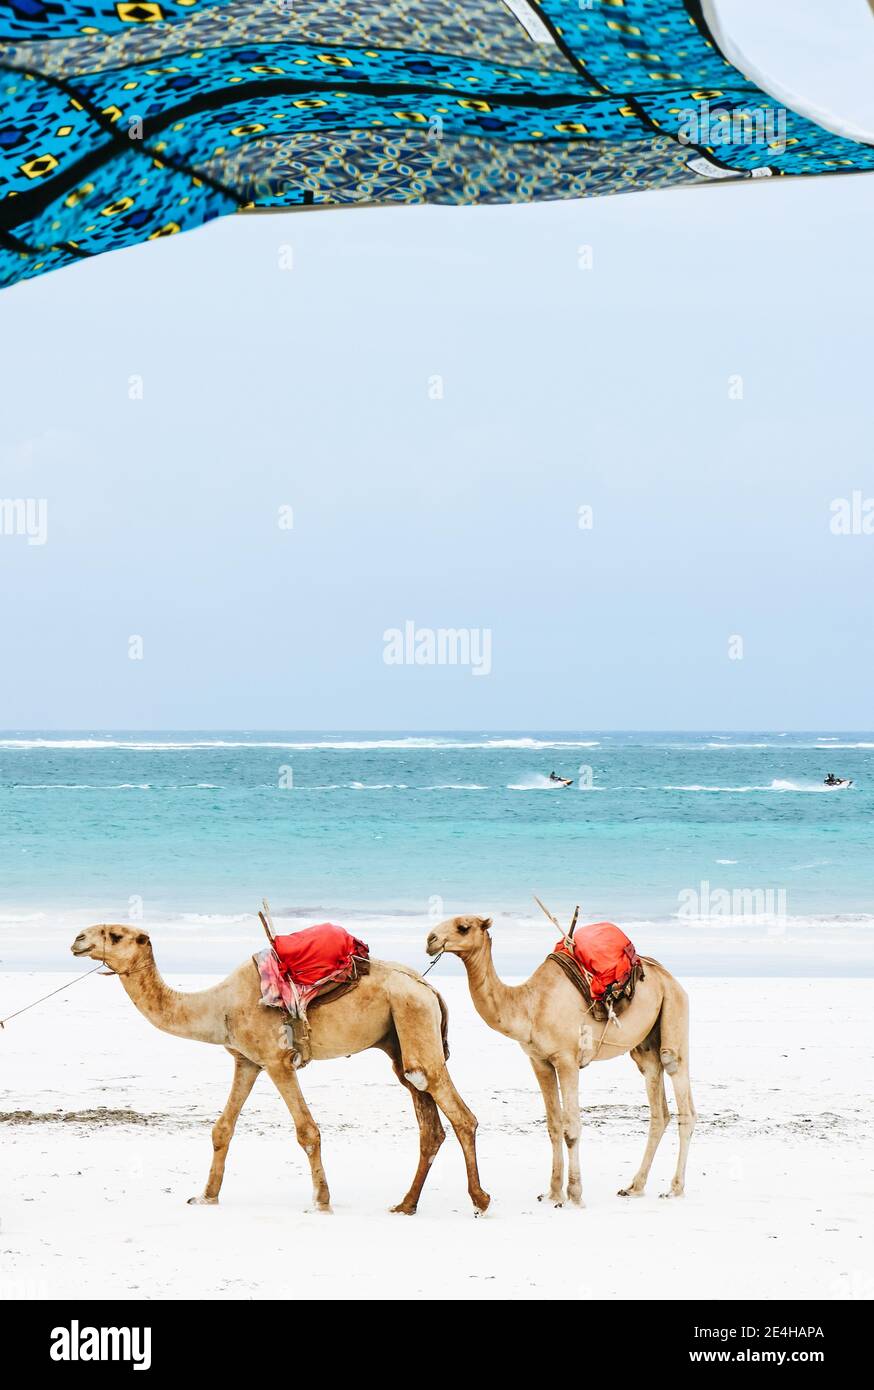 Two camels on the white sand beach of Diani, Kenya Stock Photo